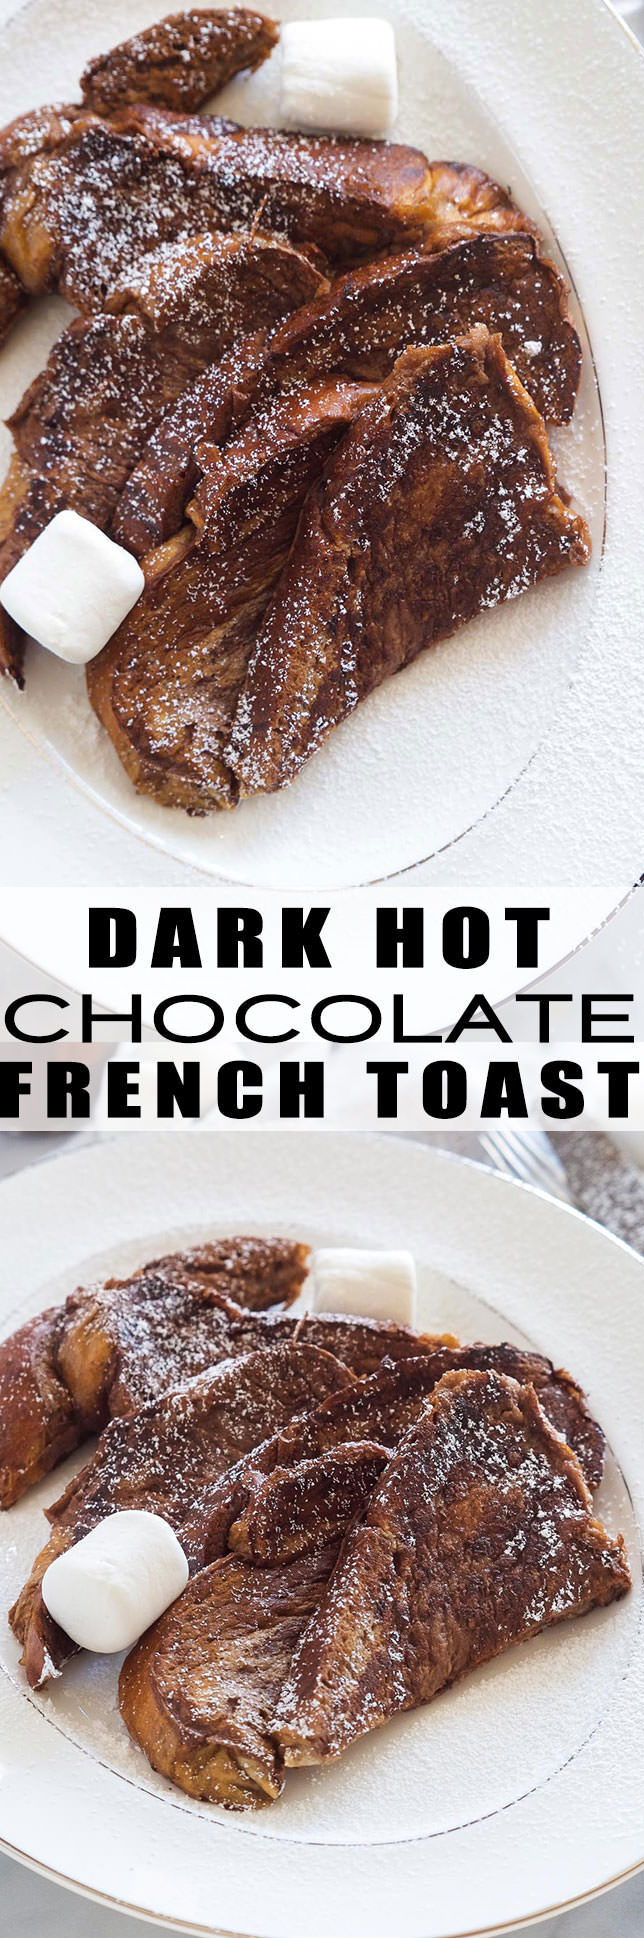 Dark Hot Chocolate French Toast is a breakfast that combines two breakfast favorites! Rich, chocolately french toast that is perfect topped with marshmallows for a delicious start to any day!